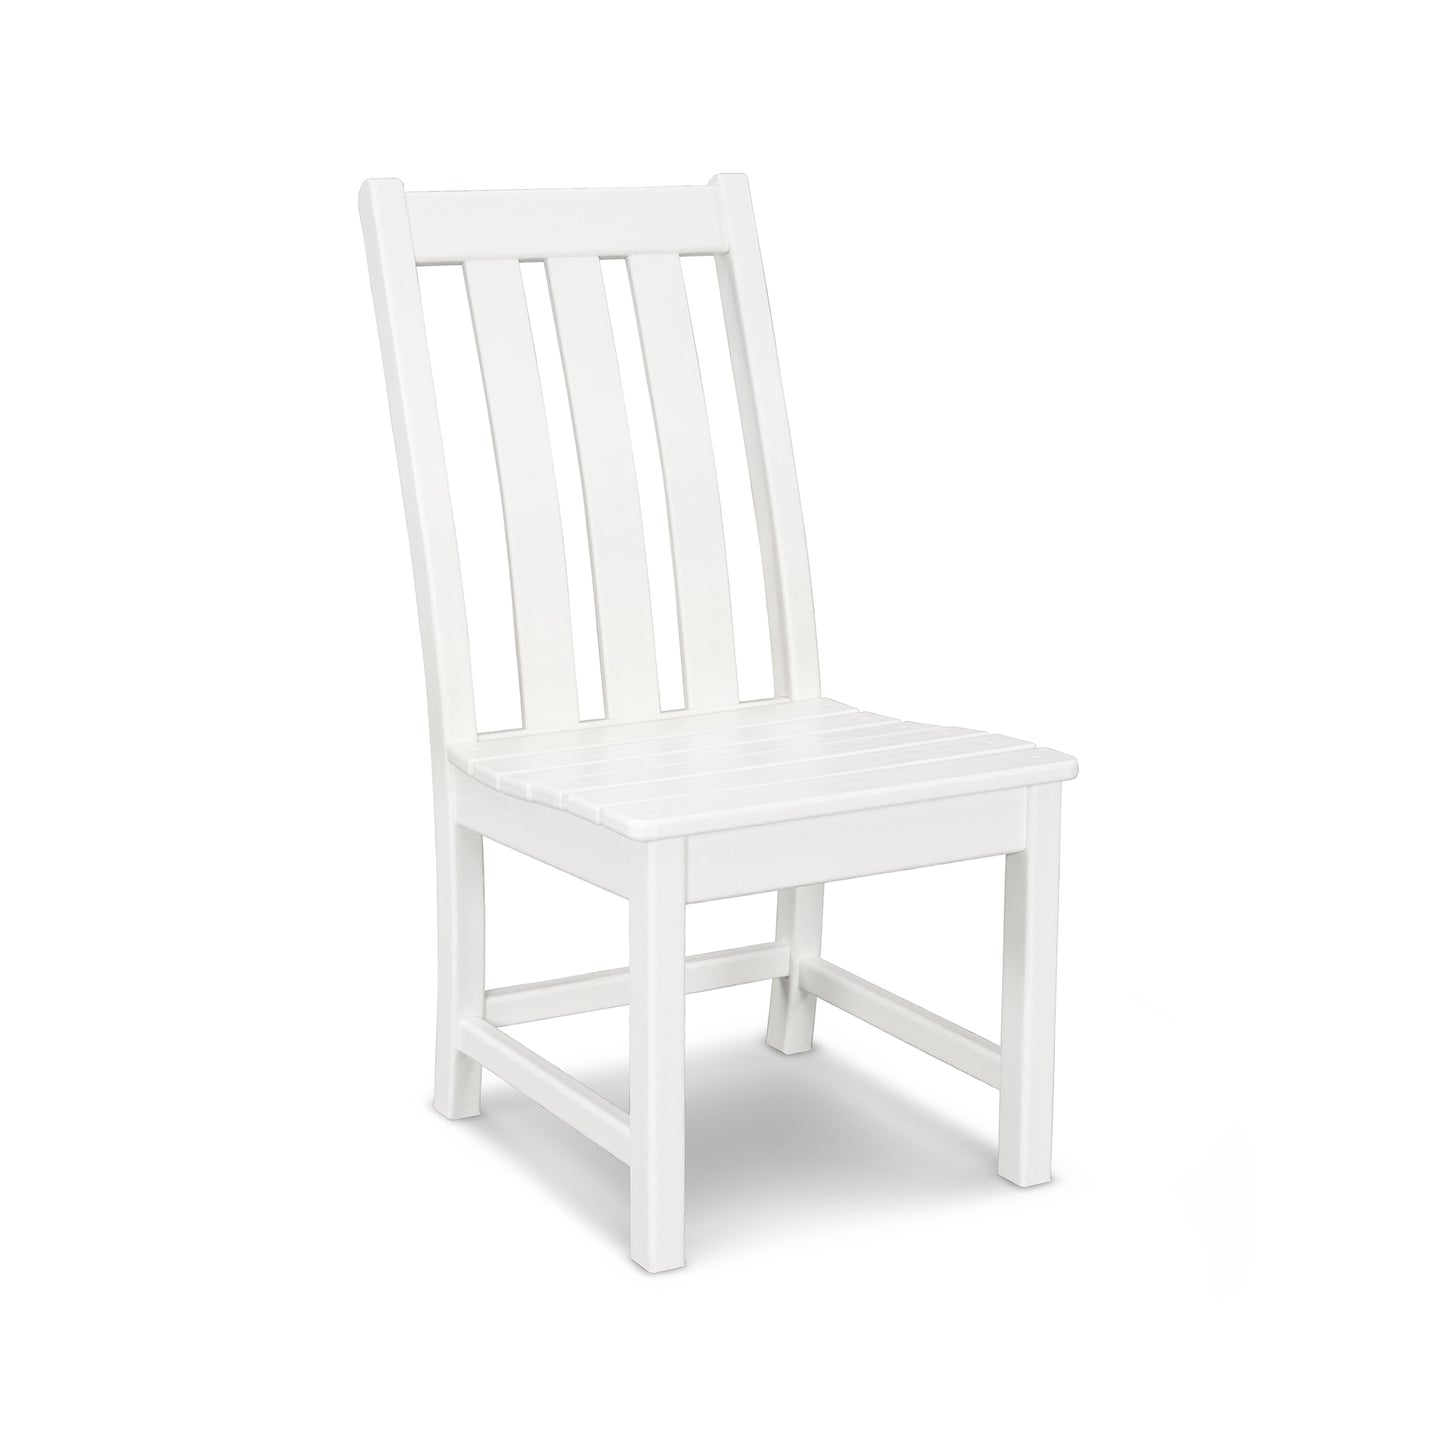 A single white POLYWOOD® Vineyard Dining Side Chair with a tall, vertical slat backrest and a flat seat, standing isolated on a plain white background.